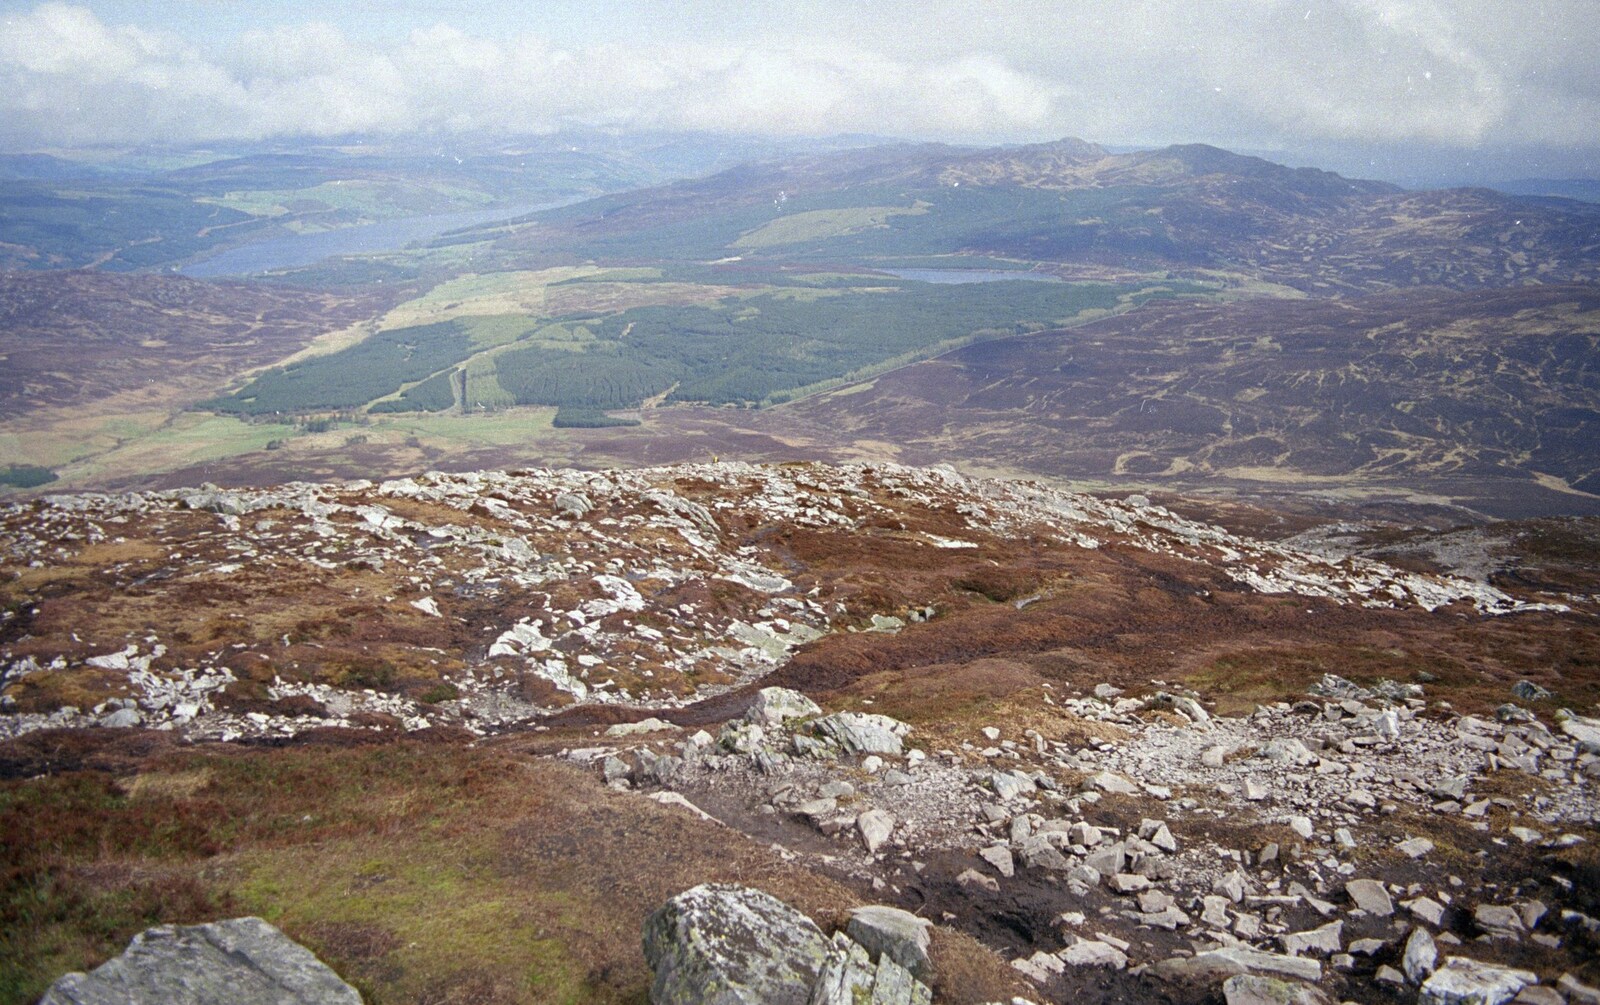 A view from the top of Scheihallion from A Trip to Pitlochry, Scotland - 24th March 1998